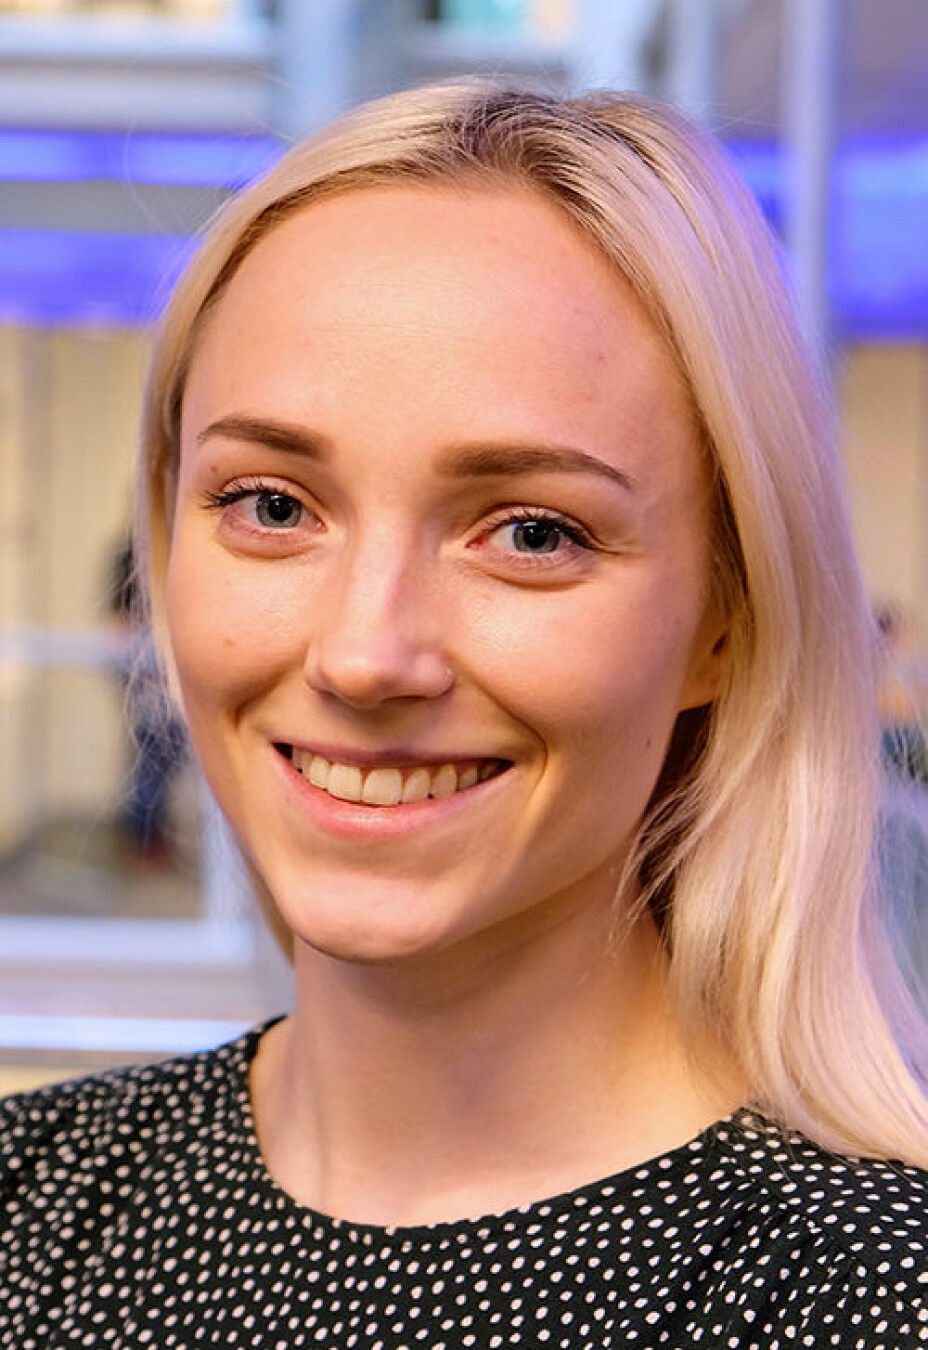 Cathrine Ro Heuch is the general manager of Nordic Brain Tech, which is developing the migraine app.